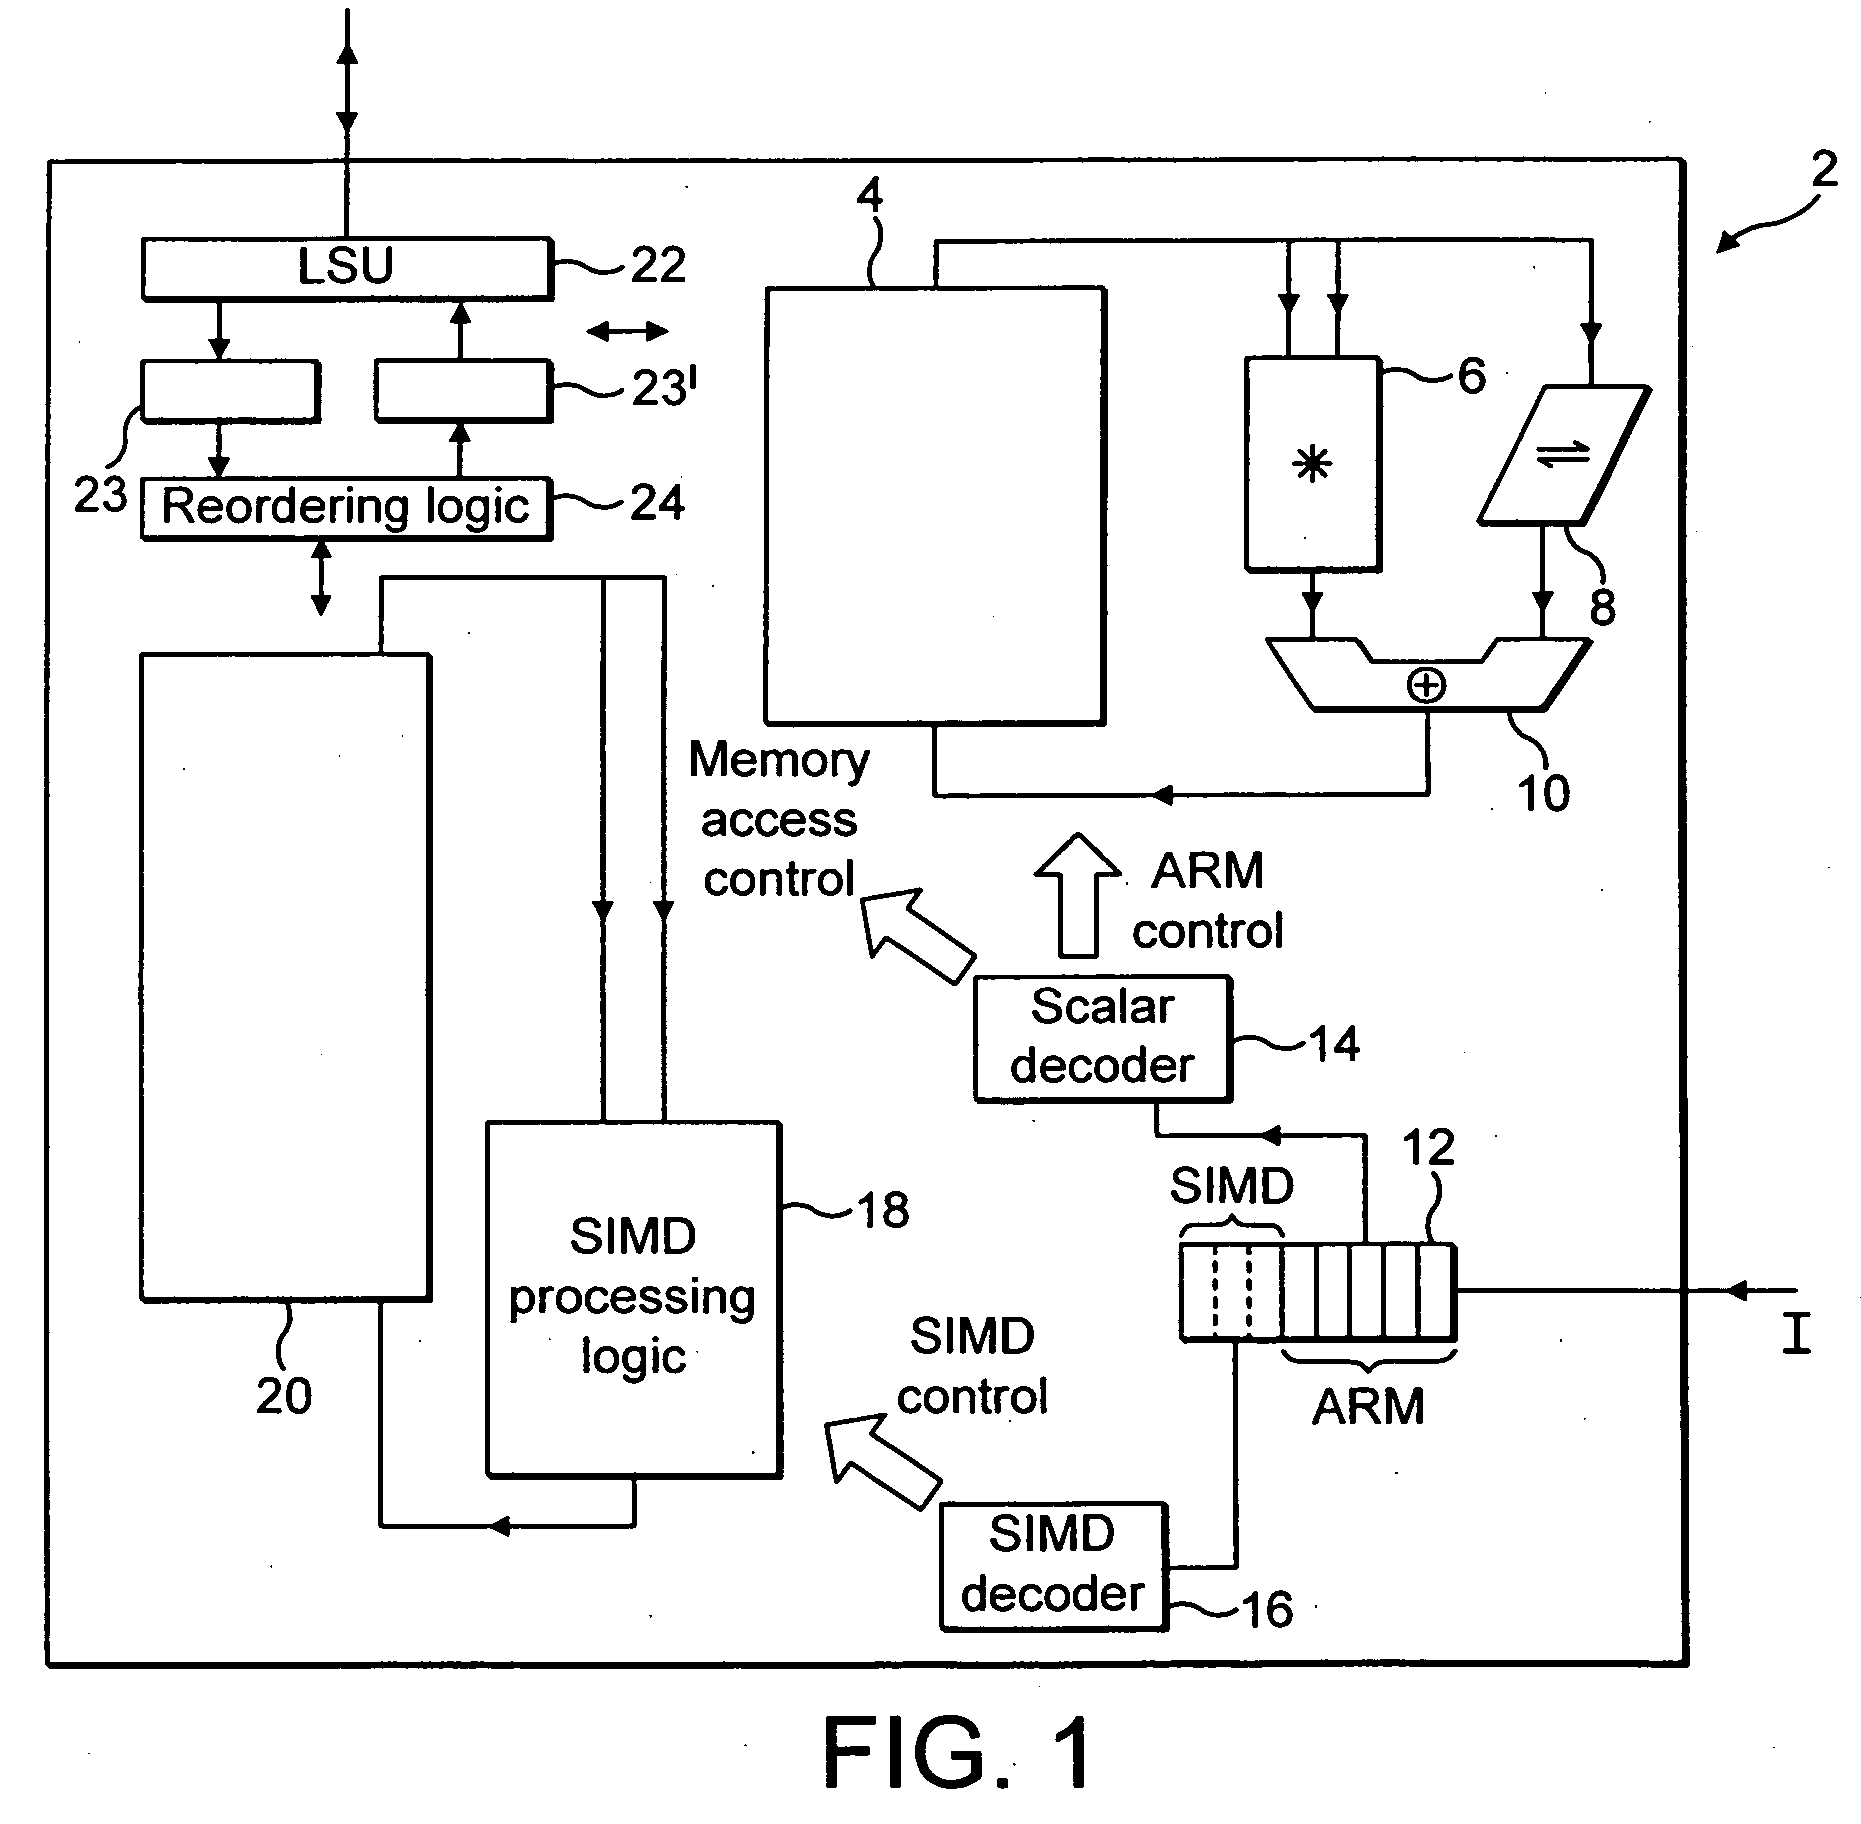 Endianess compensation within a SIMD data processing system